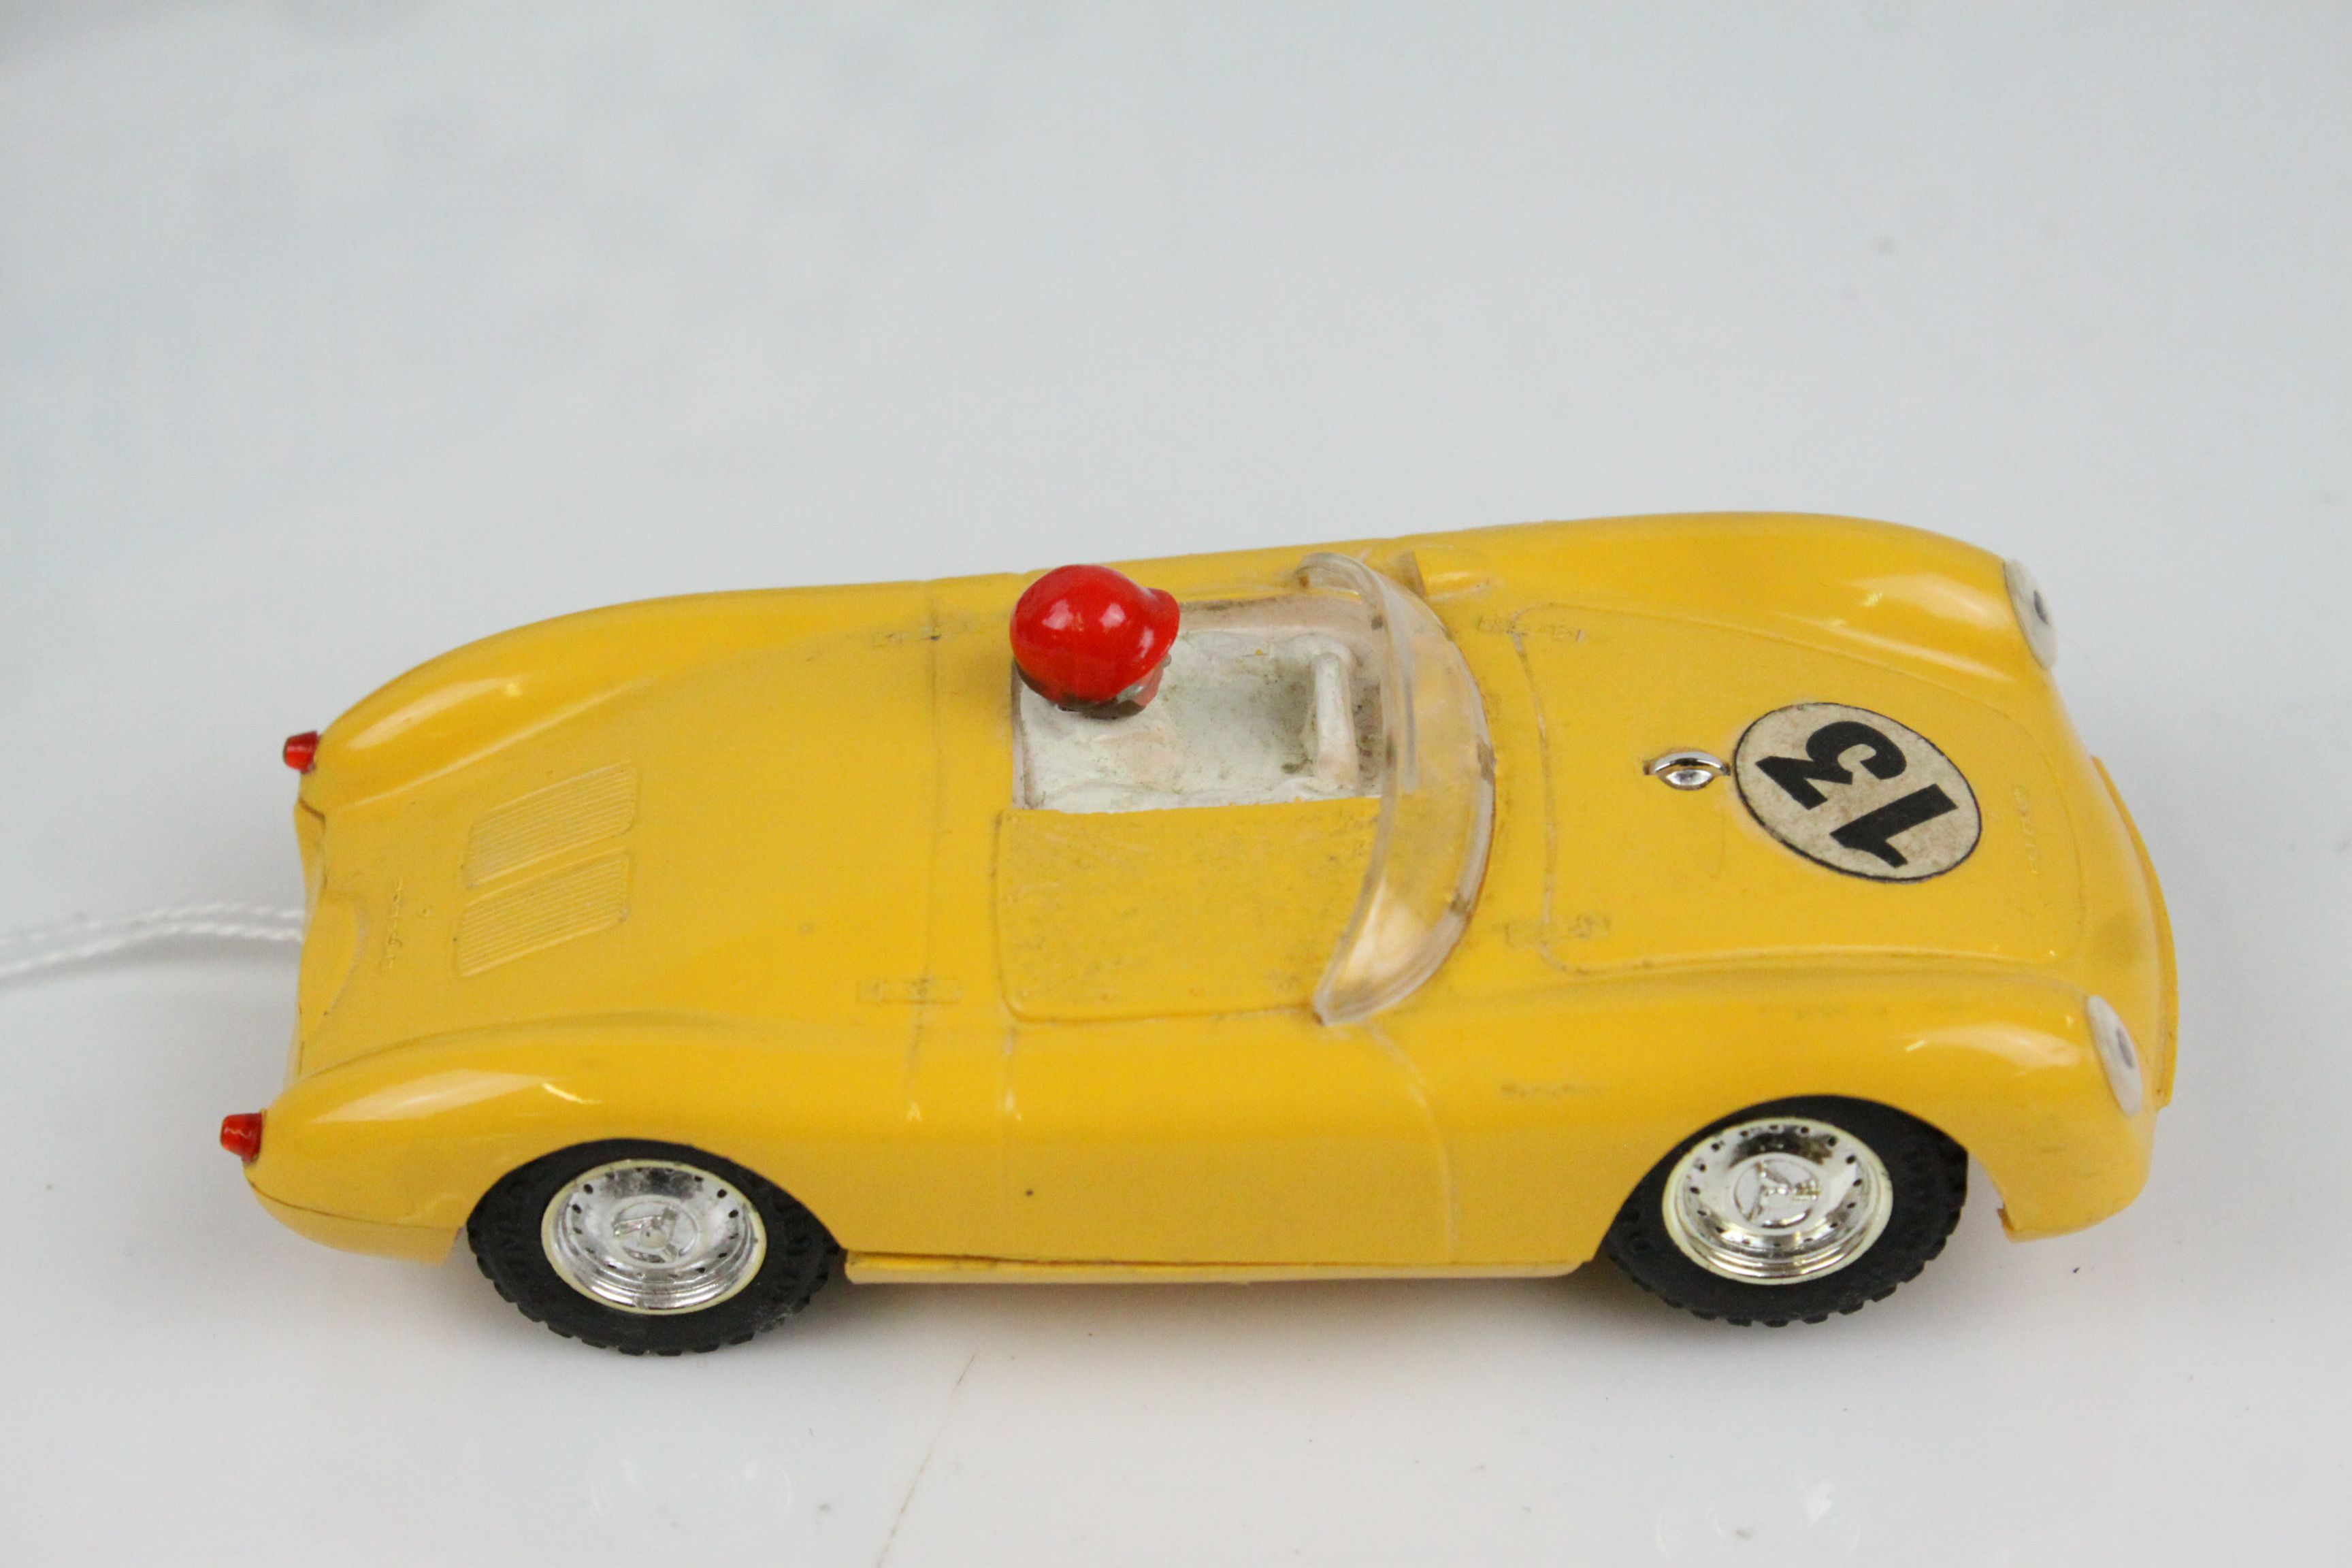 Boxed Triang Scalextric MM C61 Porsche slot car in yellow, driver with red helmet, race number 13, - Image 3 of 11